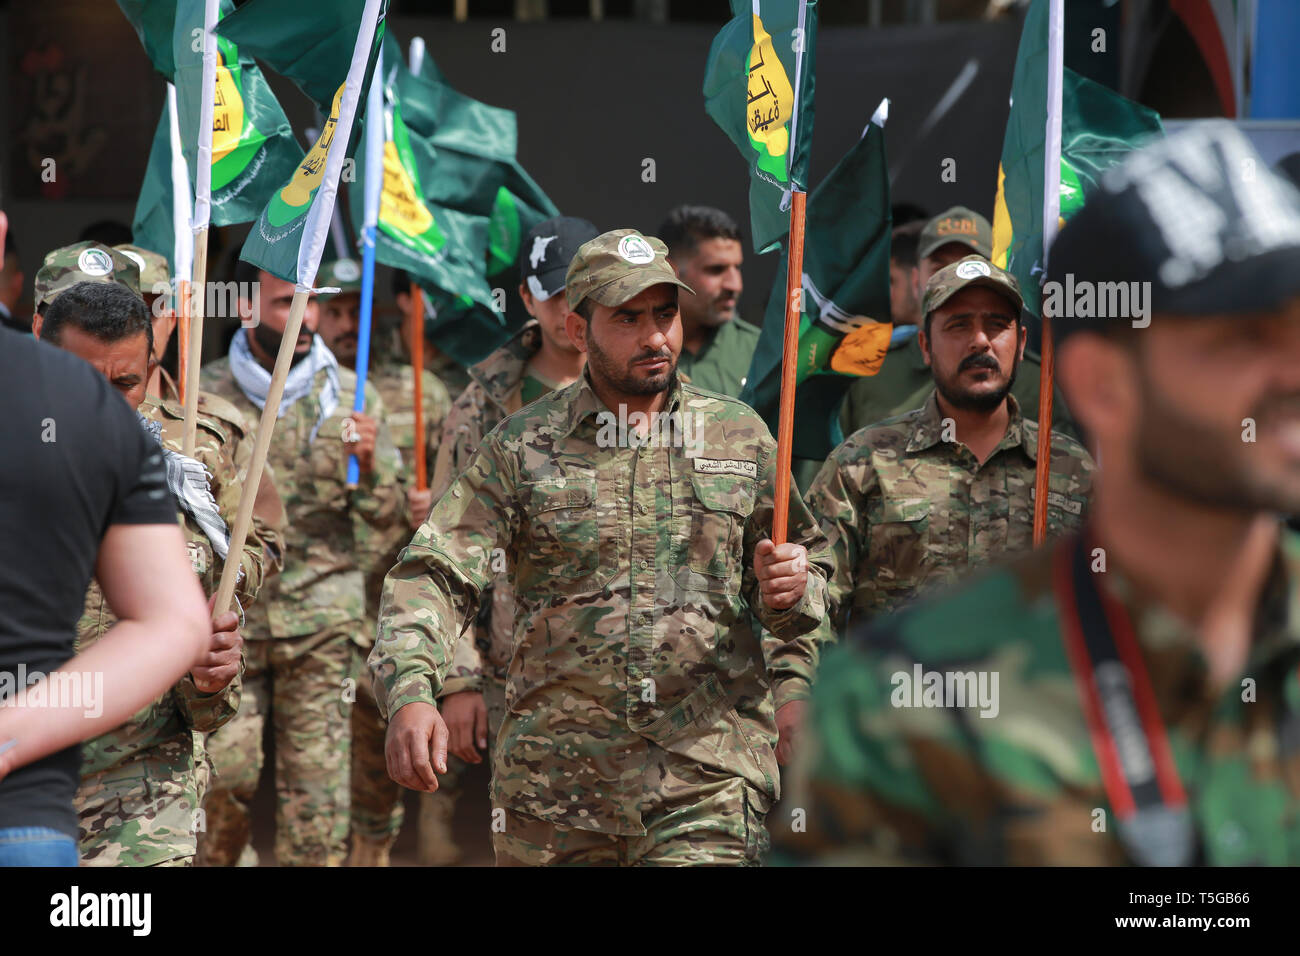 Baghdad, Iraq. 24th Apr, 2019. Members of the the predominantly Shia Muslim Popular Mobilization Forces (PMF) take part in a PMF conference to honour Iranian fighters who died fighting the so-called Islamic State (IS) terror group. Credit: Ameer Al Mohammedaw/dpa/Alamy Live News Stock Photo